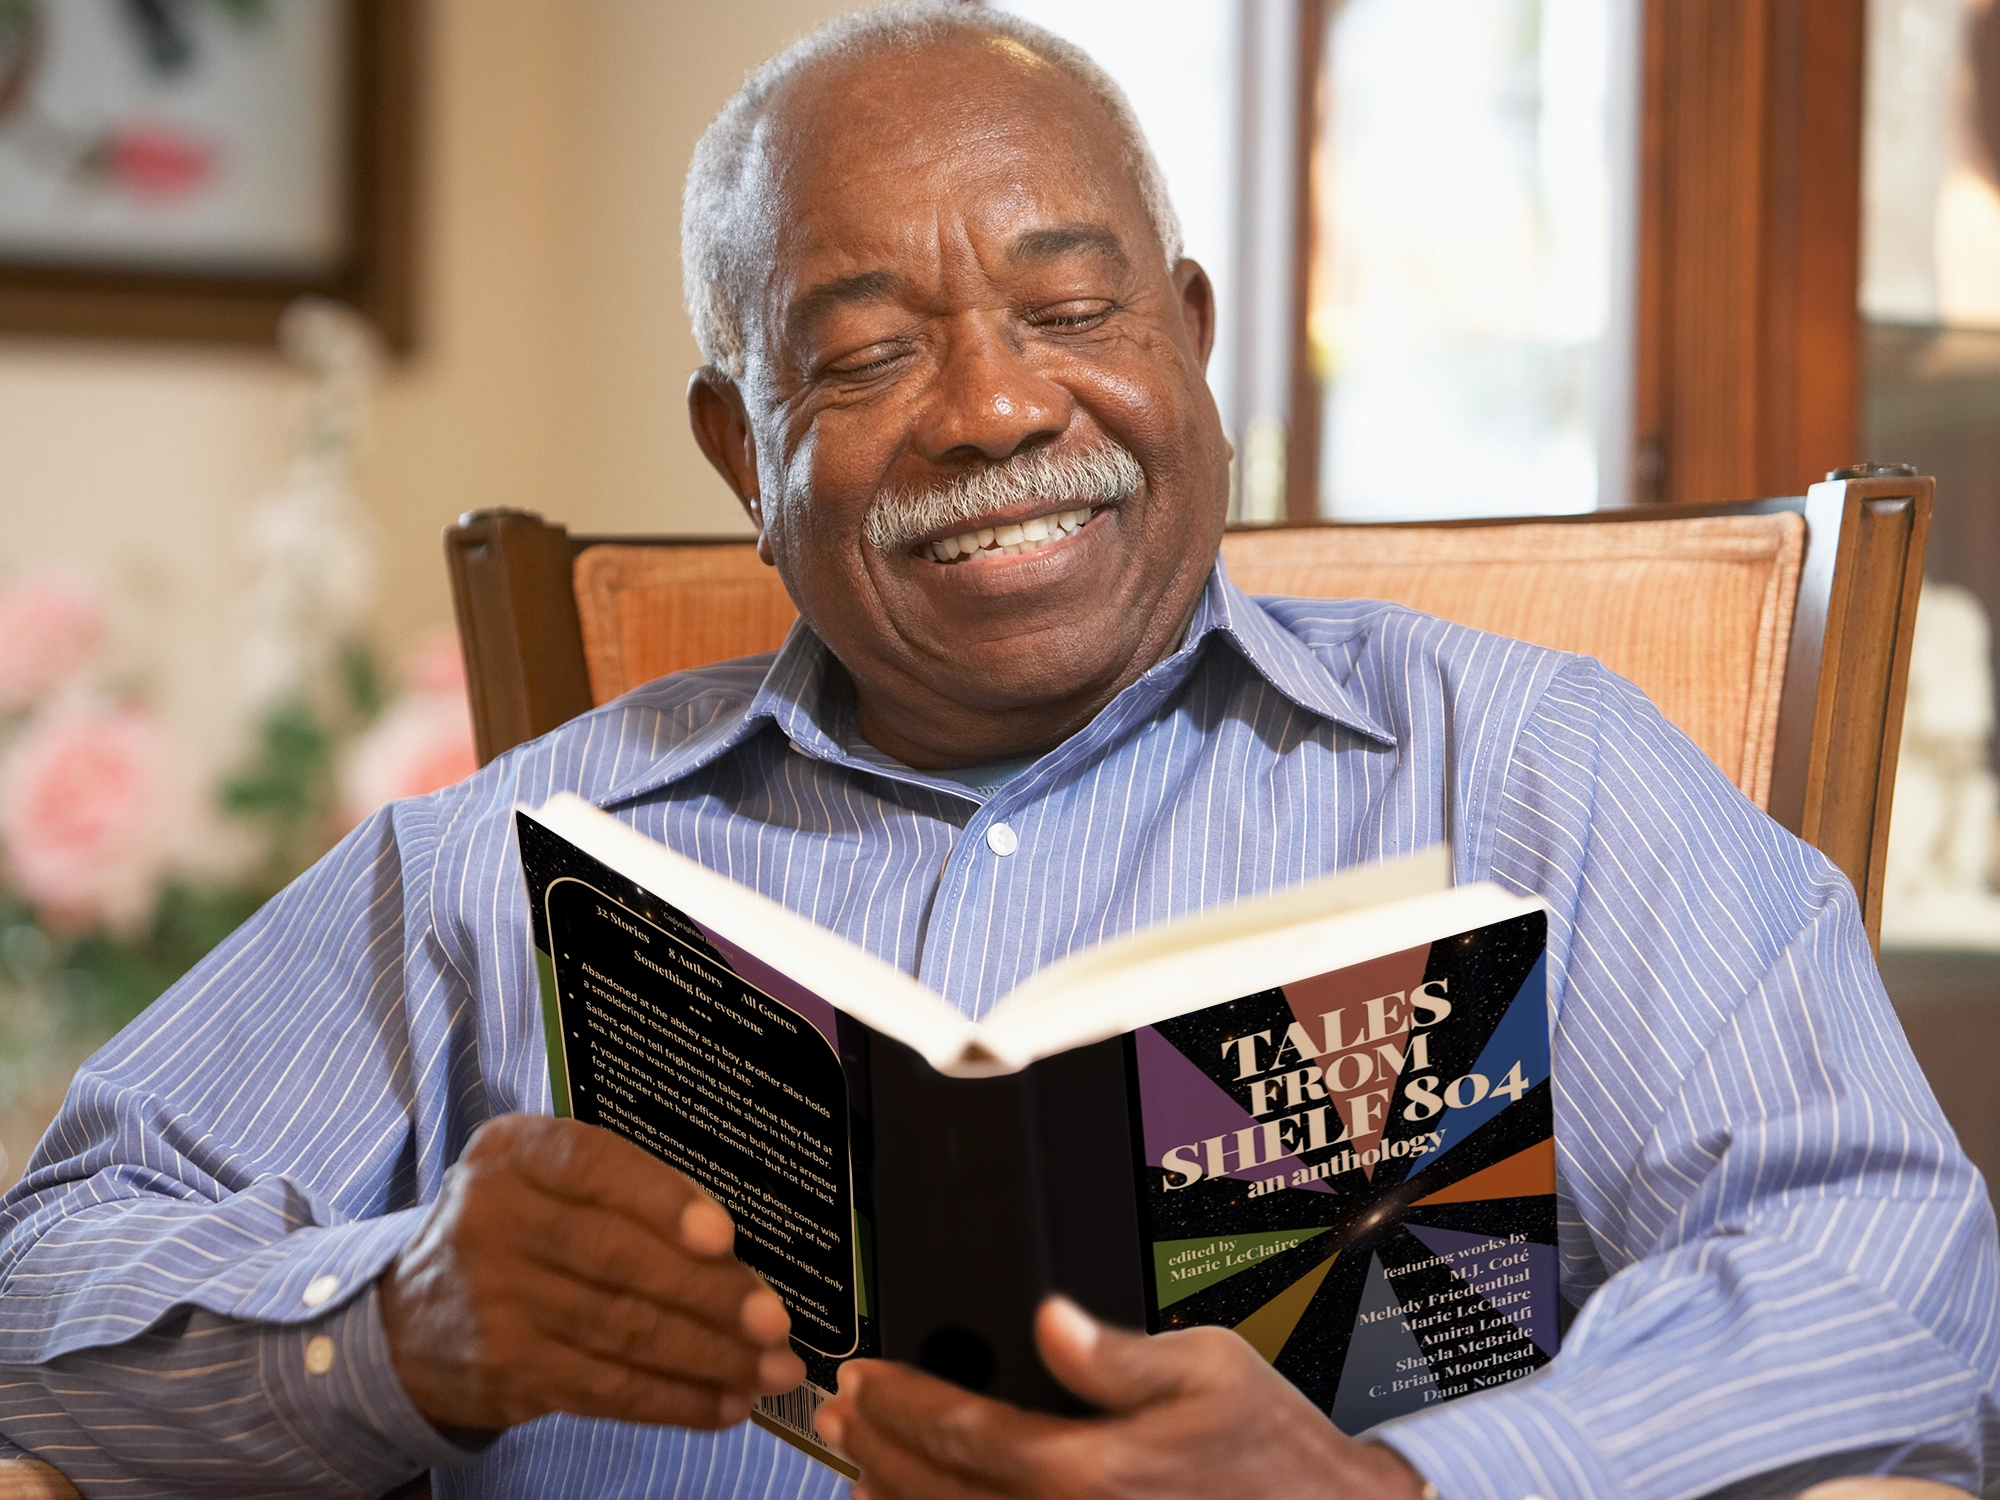 Senior man at the Book Club reading "Tales From Shelf 804"